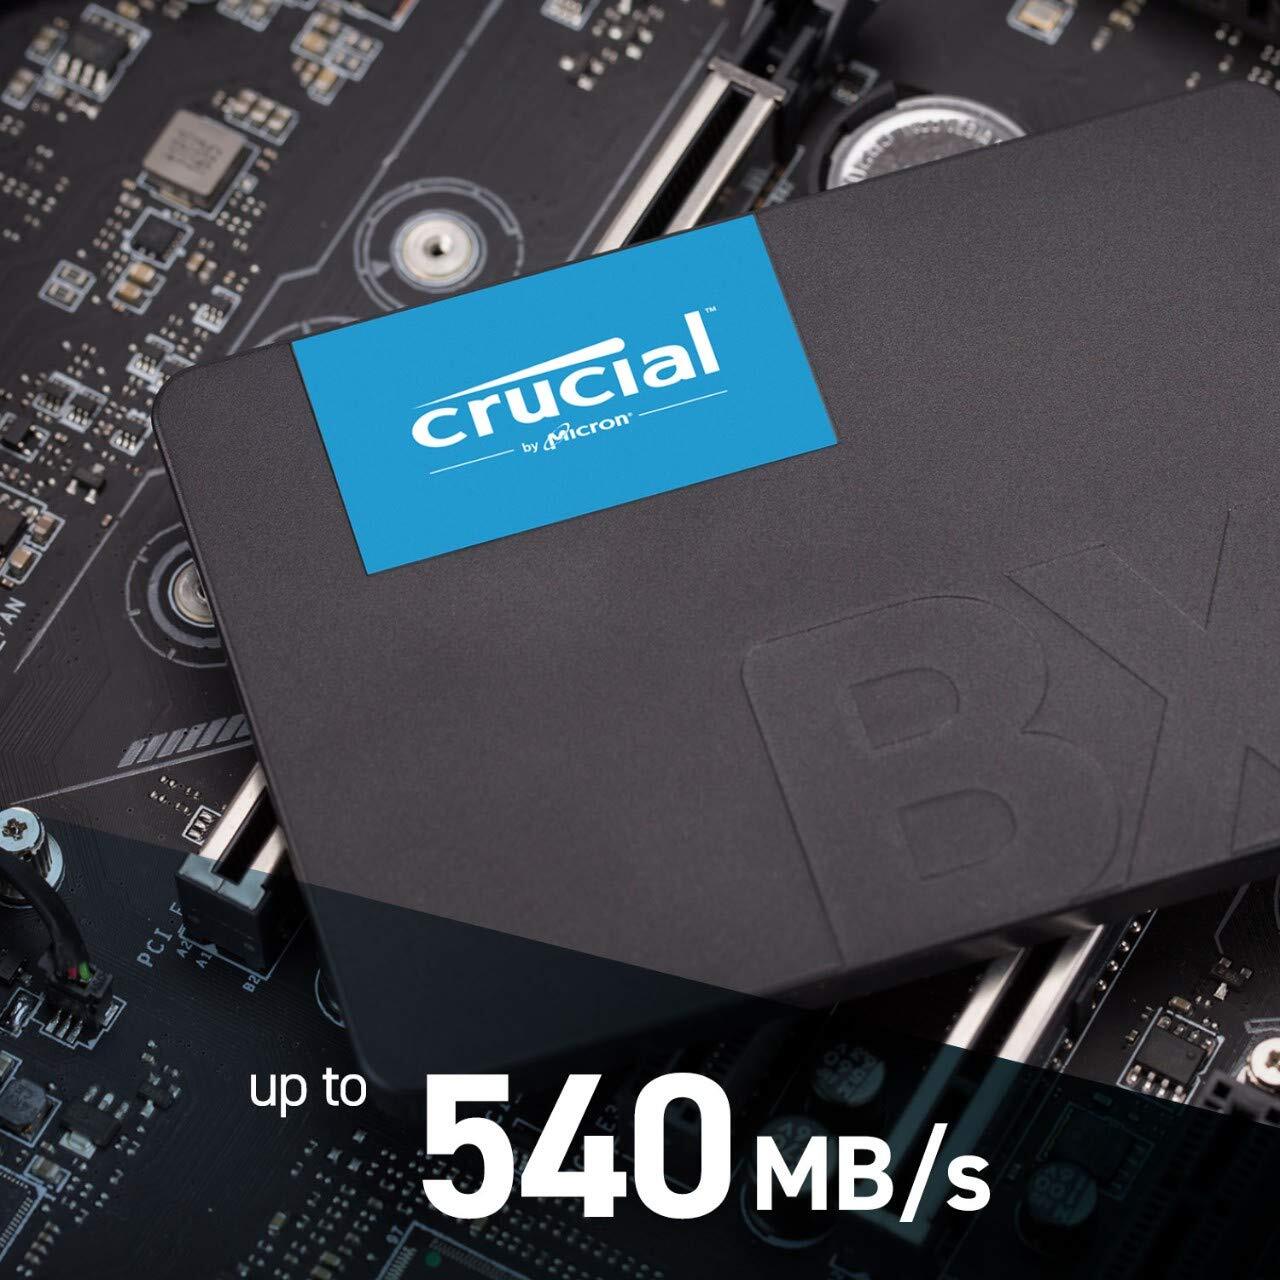 Crucial BX500 2TB 3D NAND SATA 2.5-inch Solid State Drive (SSD) 3 years Warranty